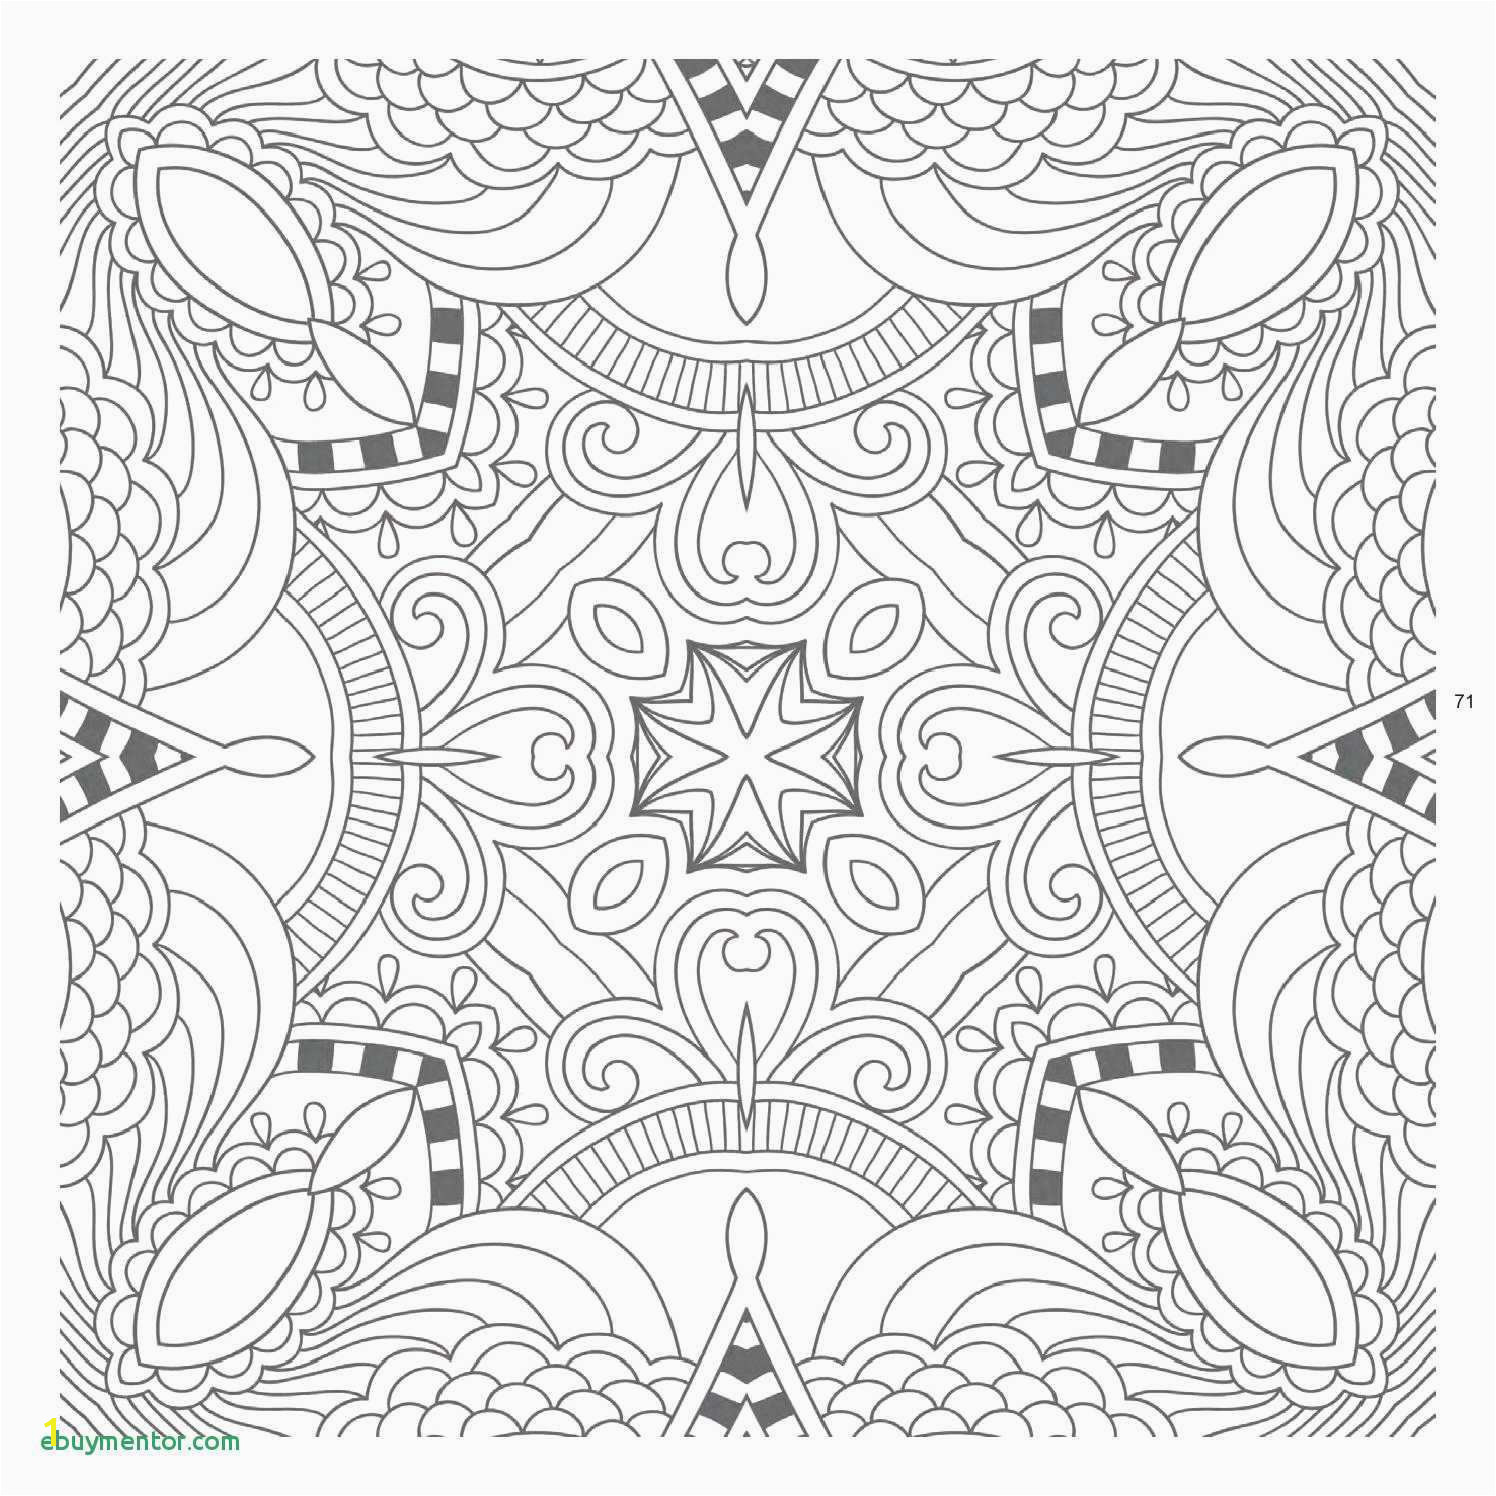 Free Printable Heart Mandala Coloring Pages Design Coloring Pages Unique 13 Best Easy Mandala Coloring Pages